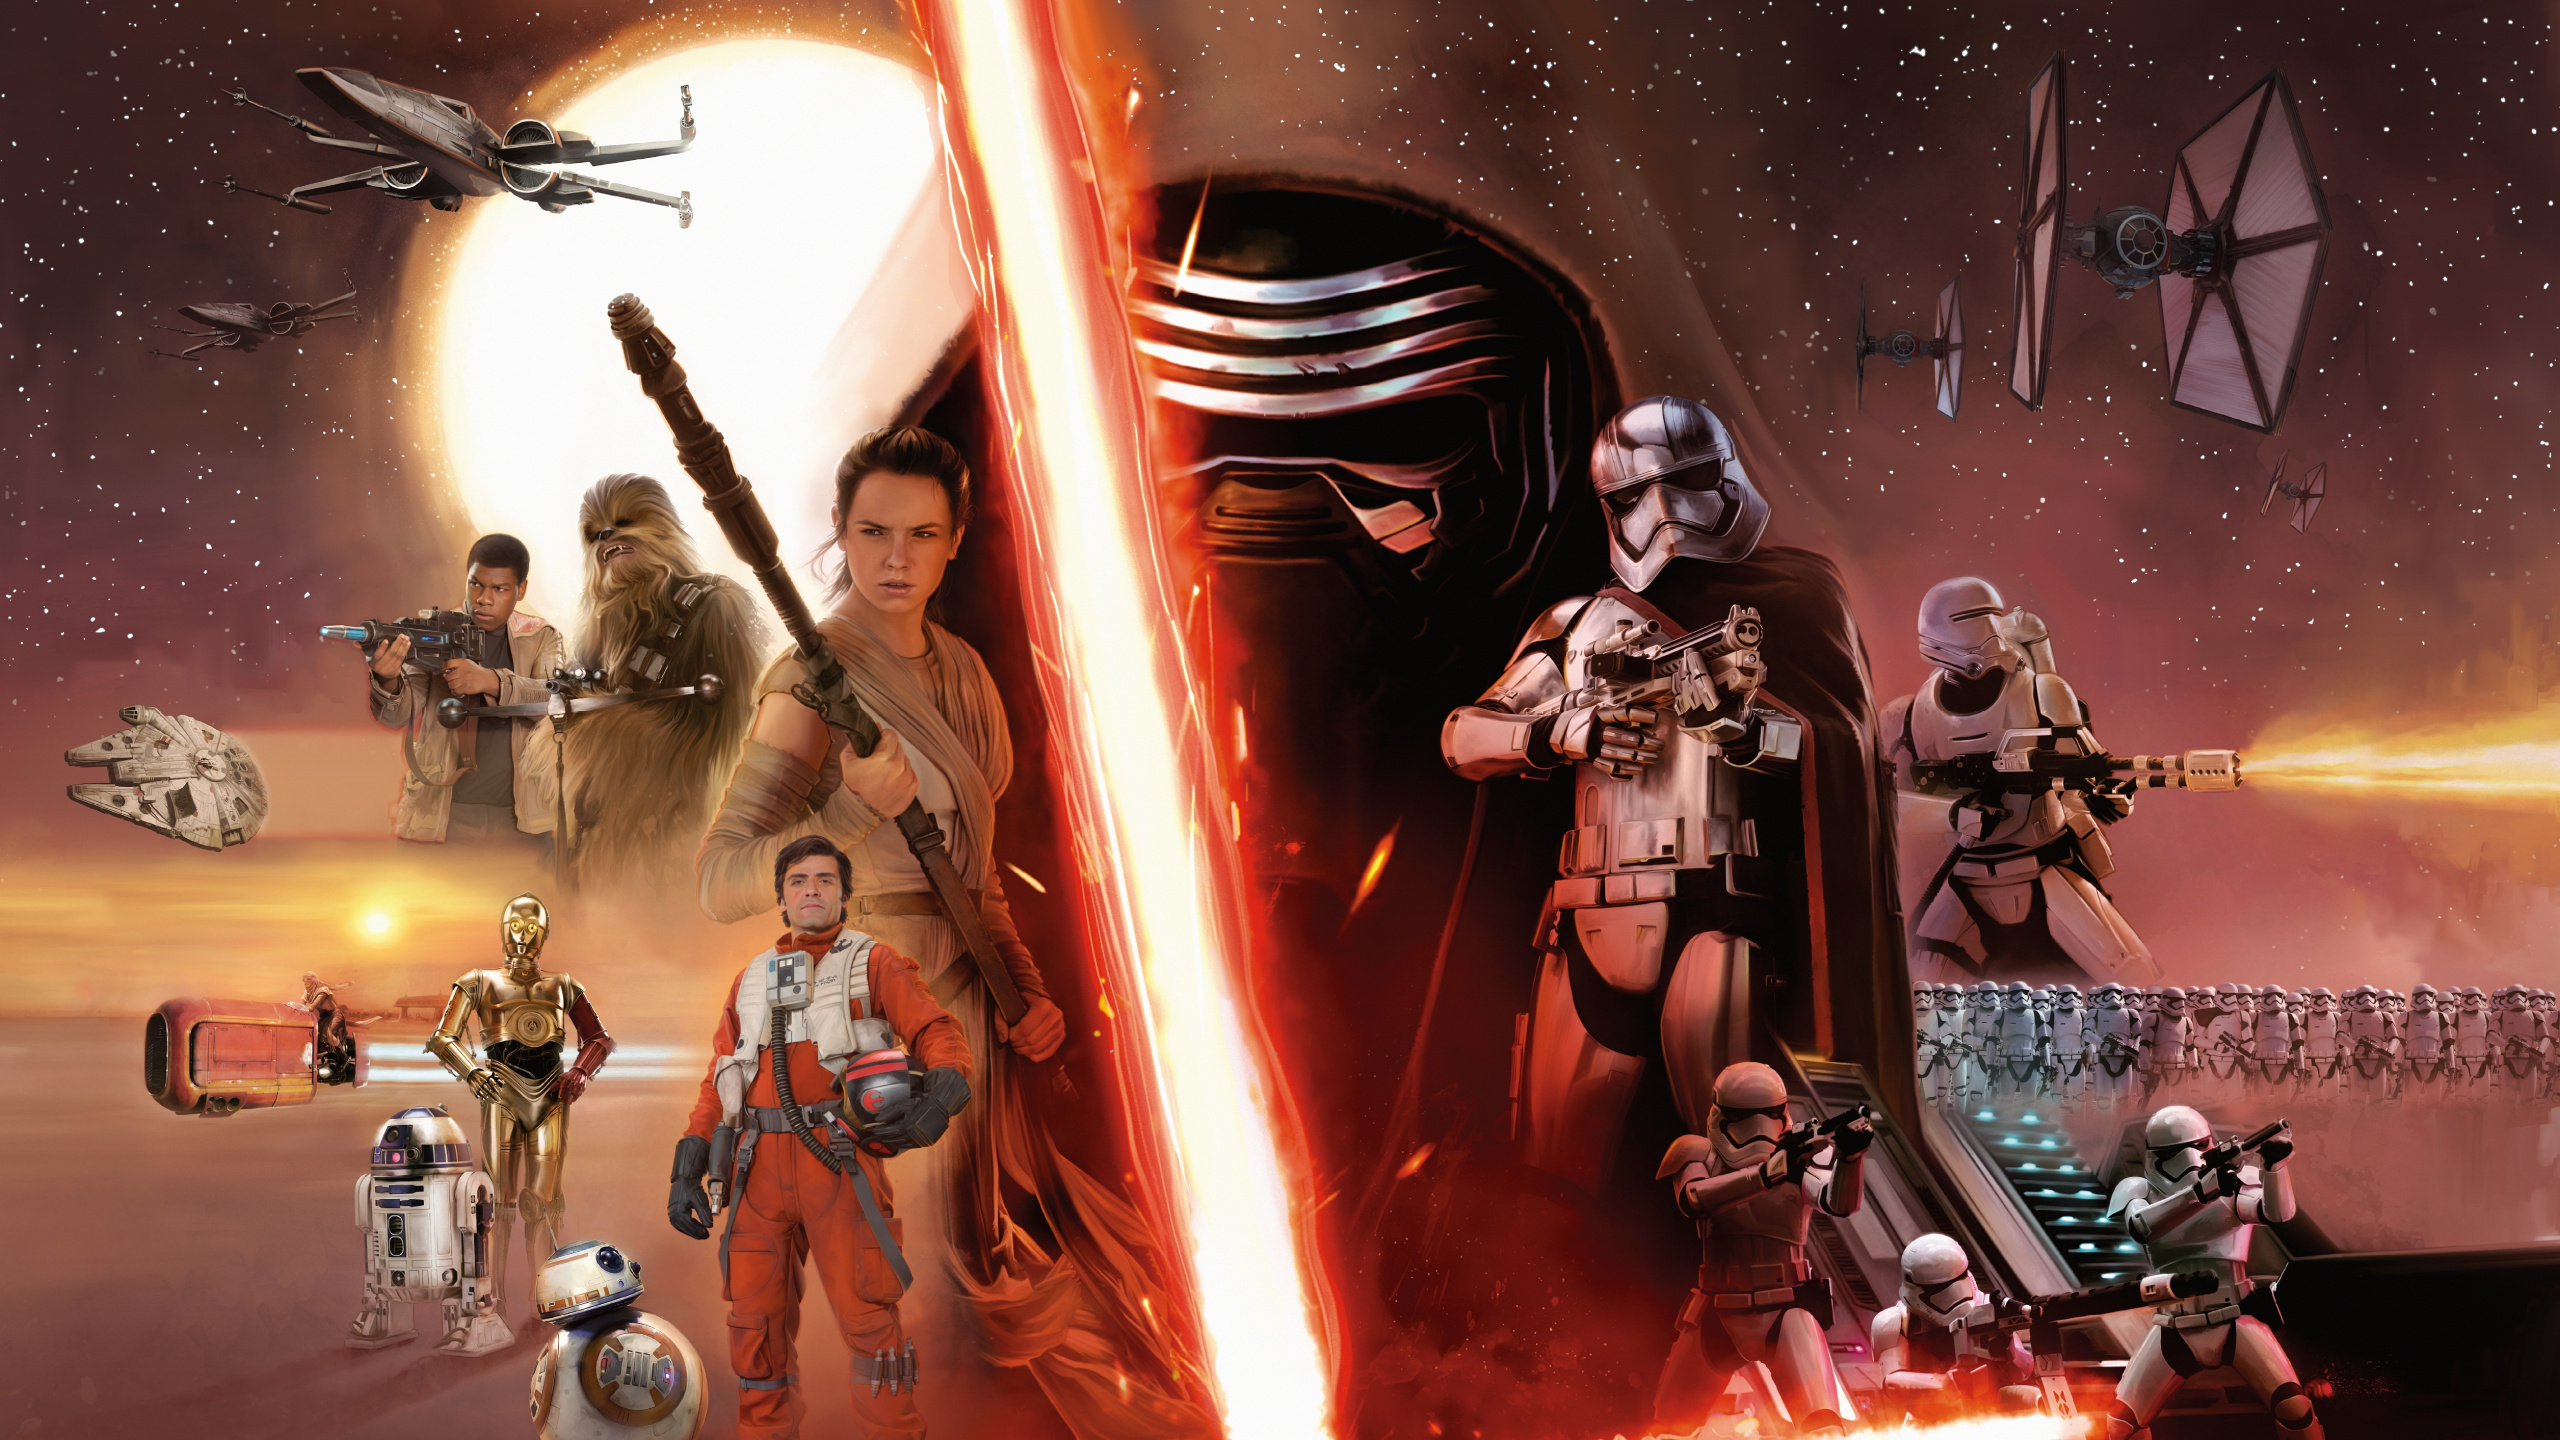 Star Wars The Force Awakens, Star Wars, Action Figure, Lucasfilm, Space. Wallpaper in 2560x1440 Resolution